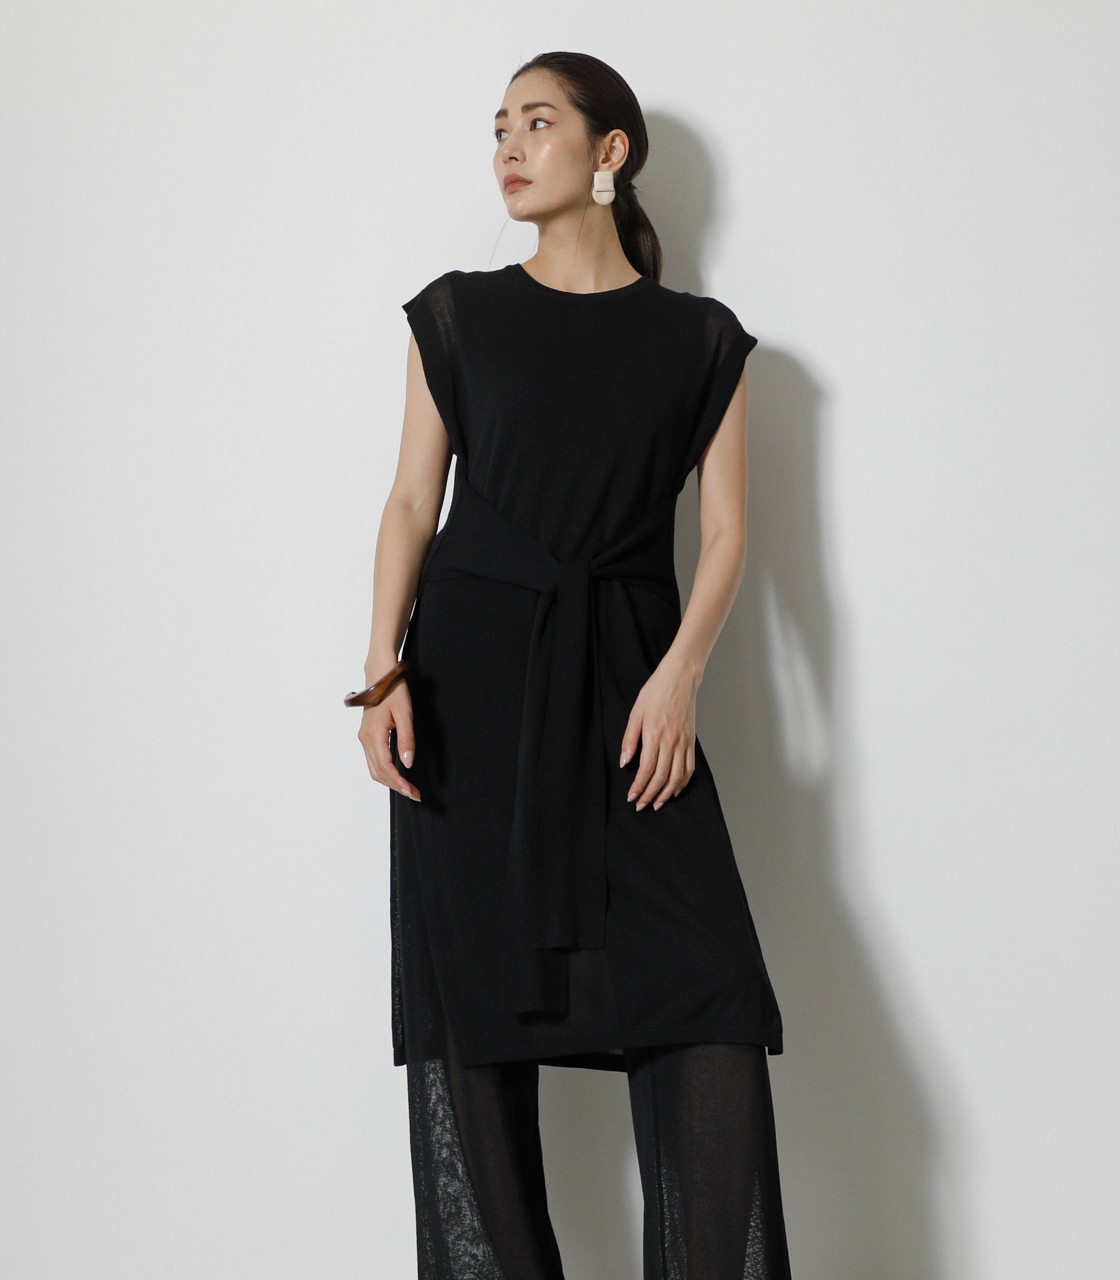 SHEER KNIT LONG TOPS/シアーニットロングトップス 詳細画像 BLK 1